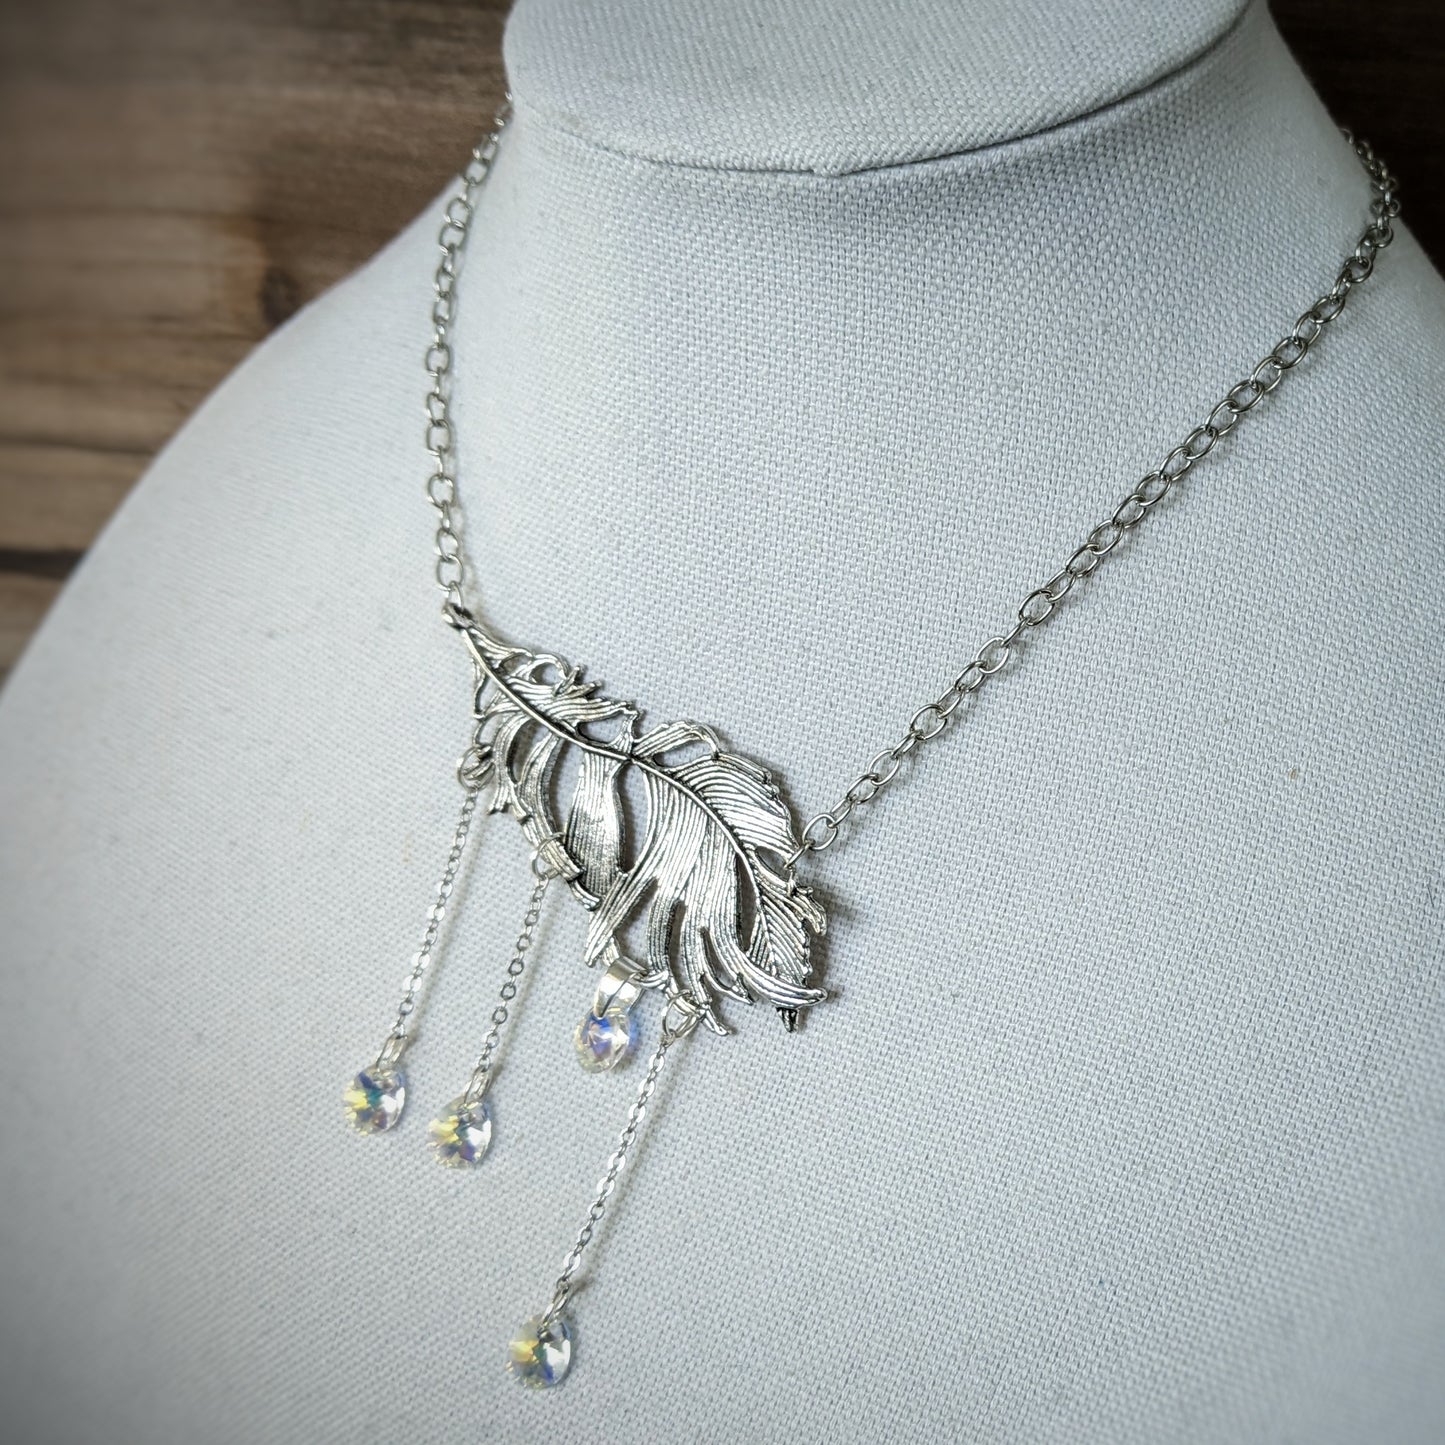 A silver necklace with a large silver leaf focal and crystal drops hanging from it.